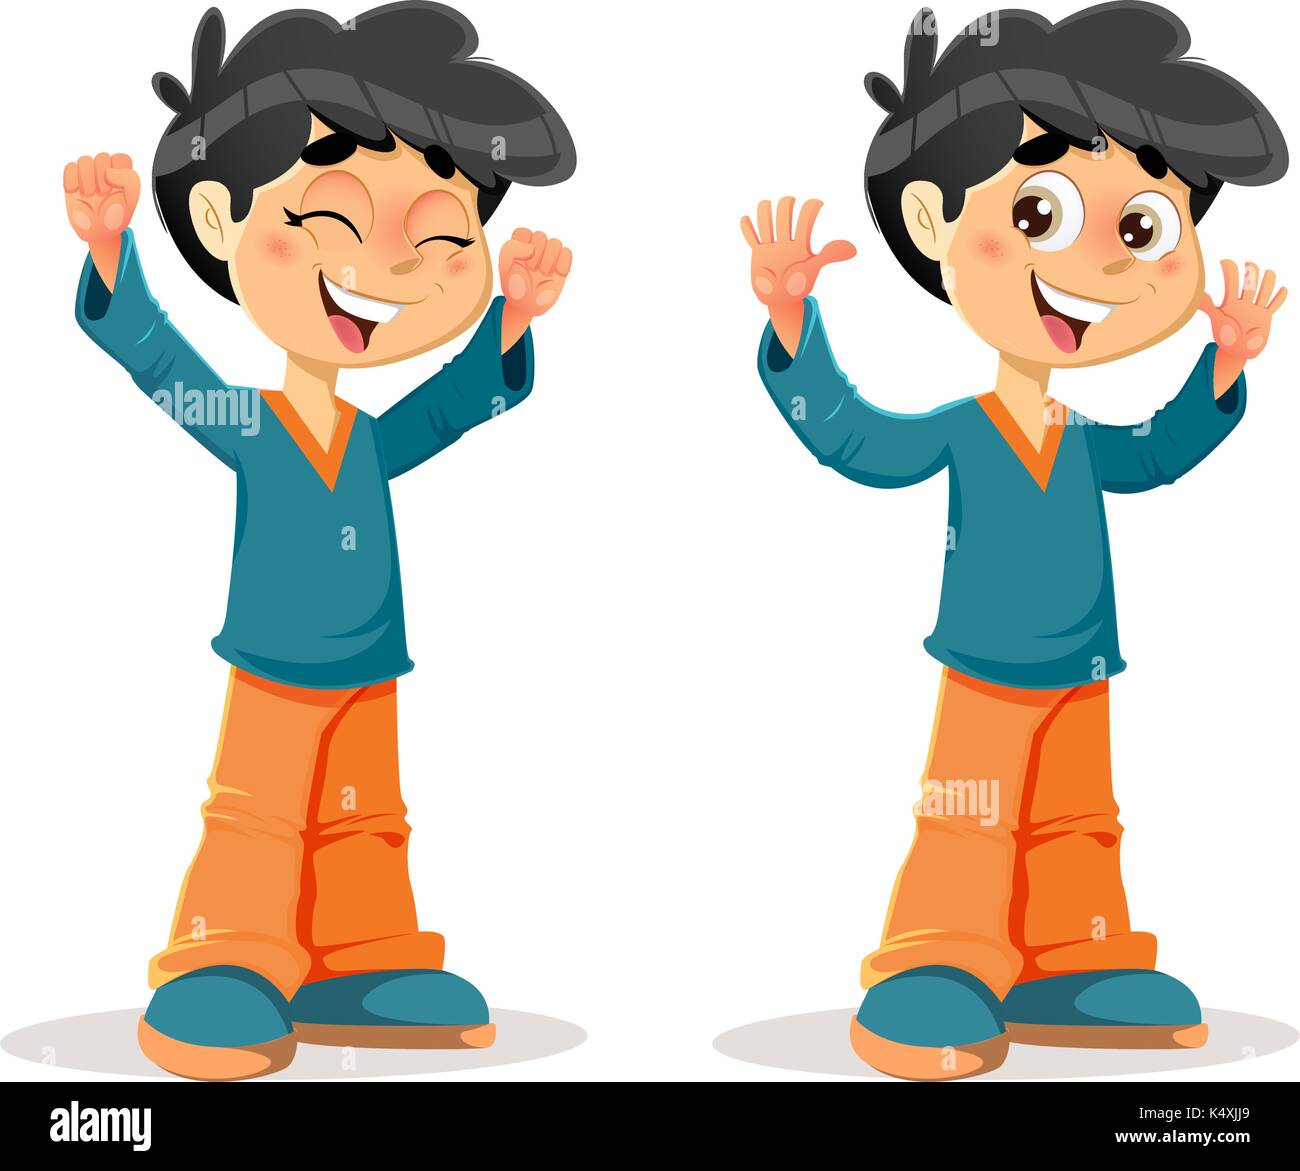 Vector Illustration of Happy Victorious Young Boy Body Language and Expressions Stock Vector